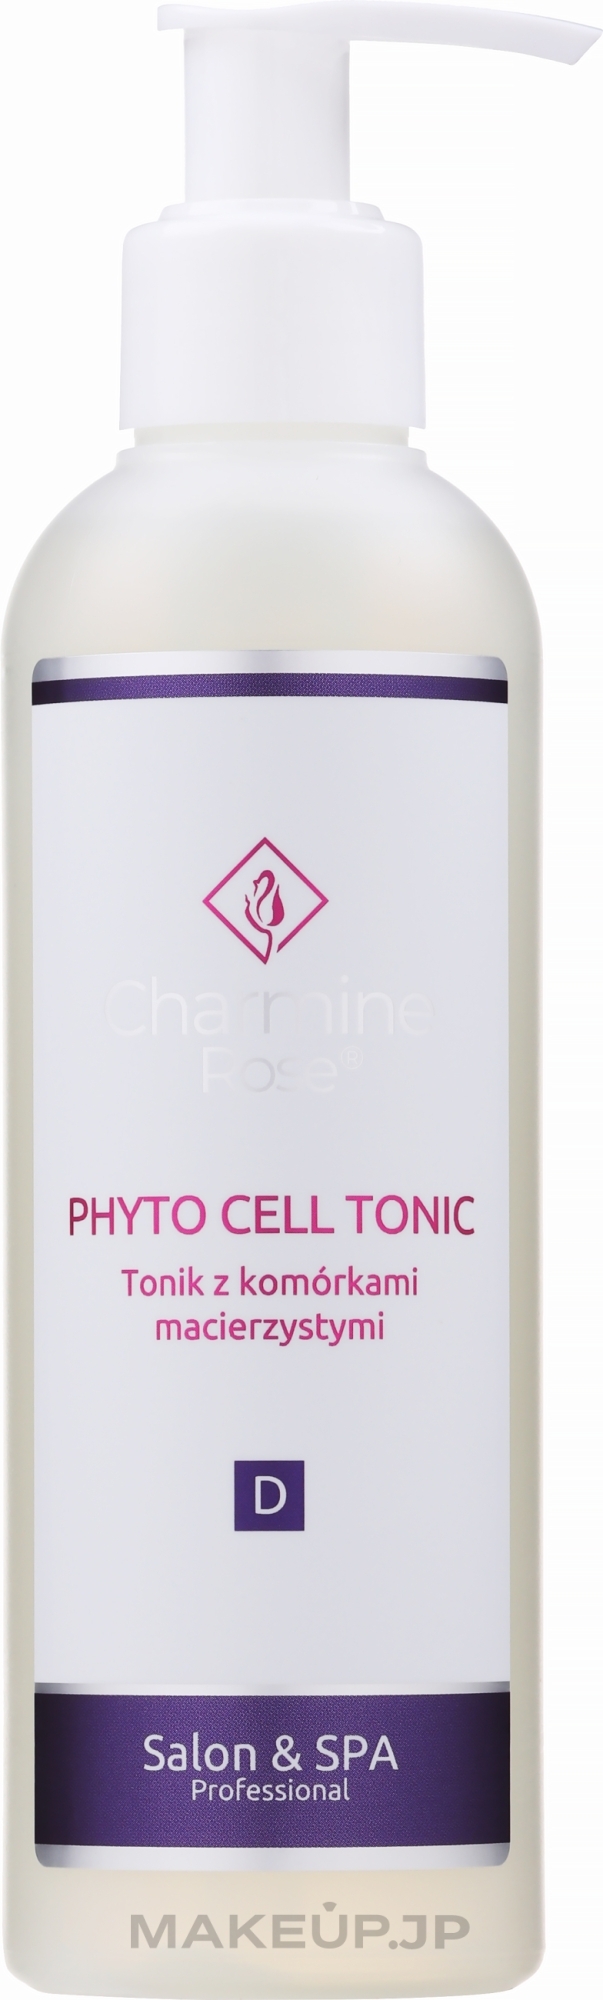 Stem Cell Tonic - Charmine Rose Phyto Cell Tonic — photo 200 ml